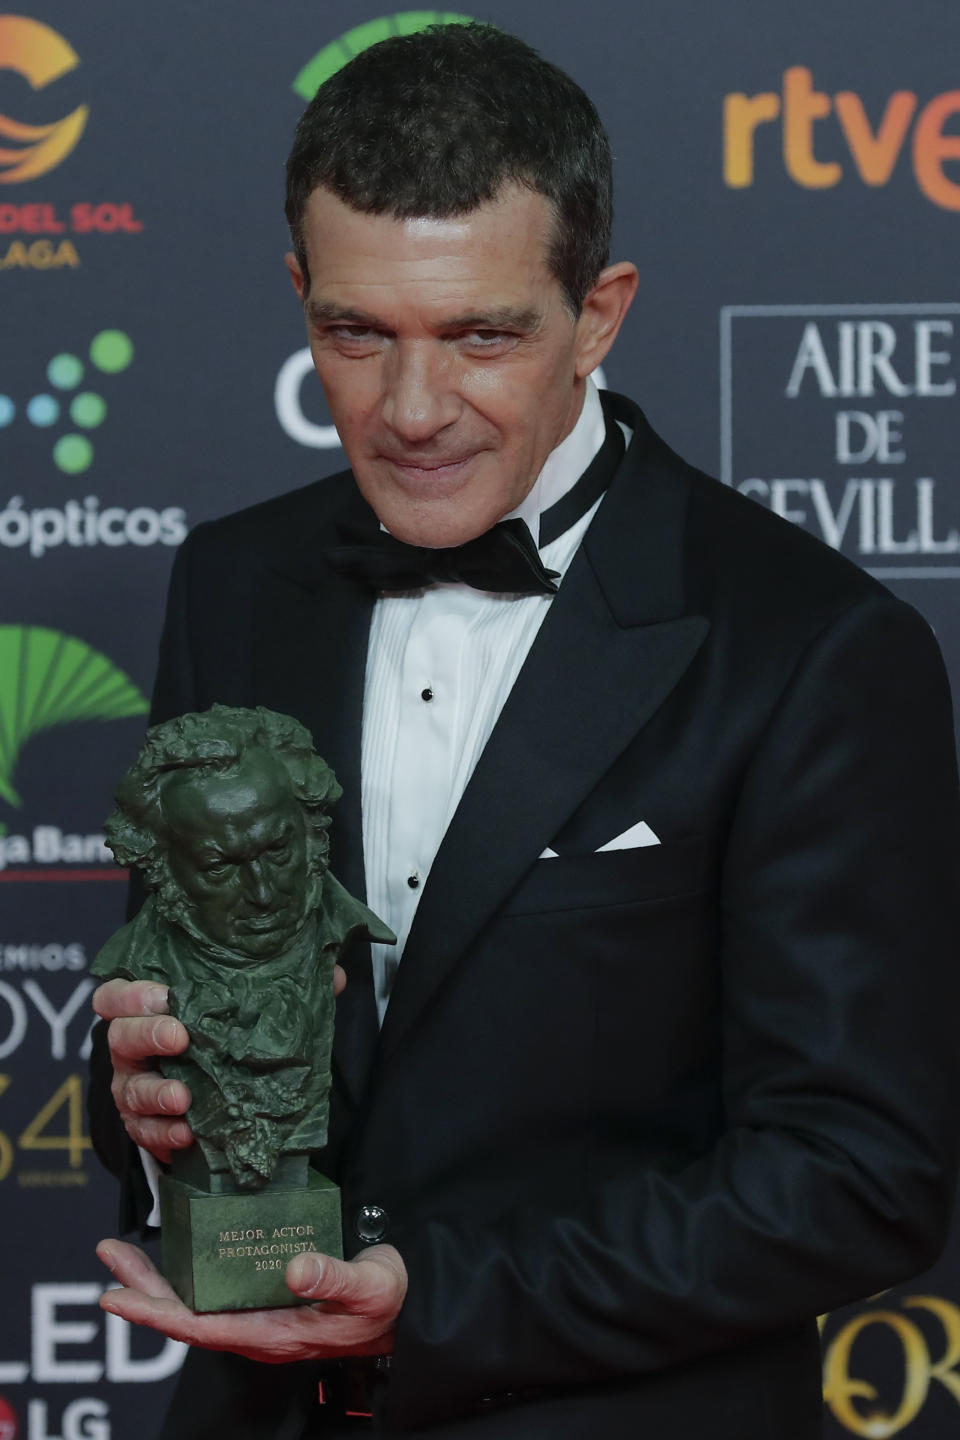 Spanish actor Antonio Banderas poses with his trophy after winning the best leading actor award for "Dolor y gloria" during the Goya Film Awards Ceremony in Malaga, southern Spain, early Sunday, Jan. 26, 2020. The annual Goya Awards are Spain's main national film awards. (AP Photo/Manu Fernandez)